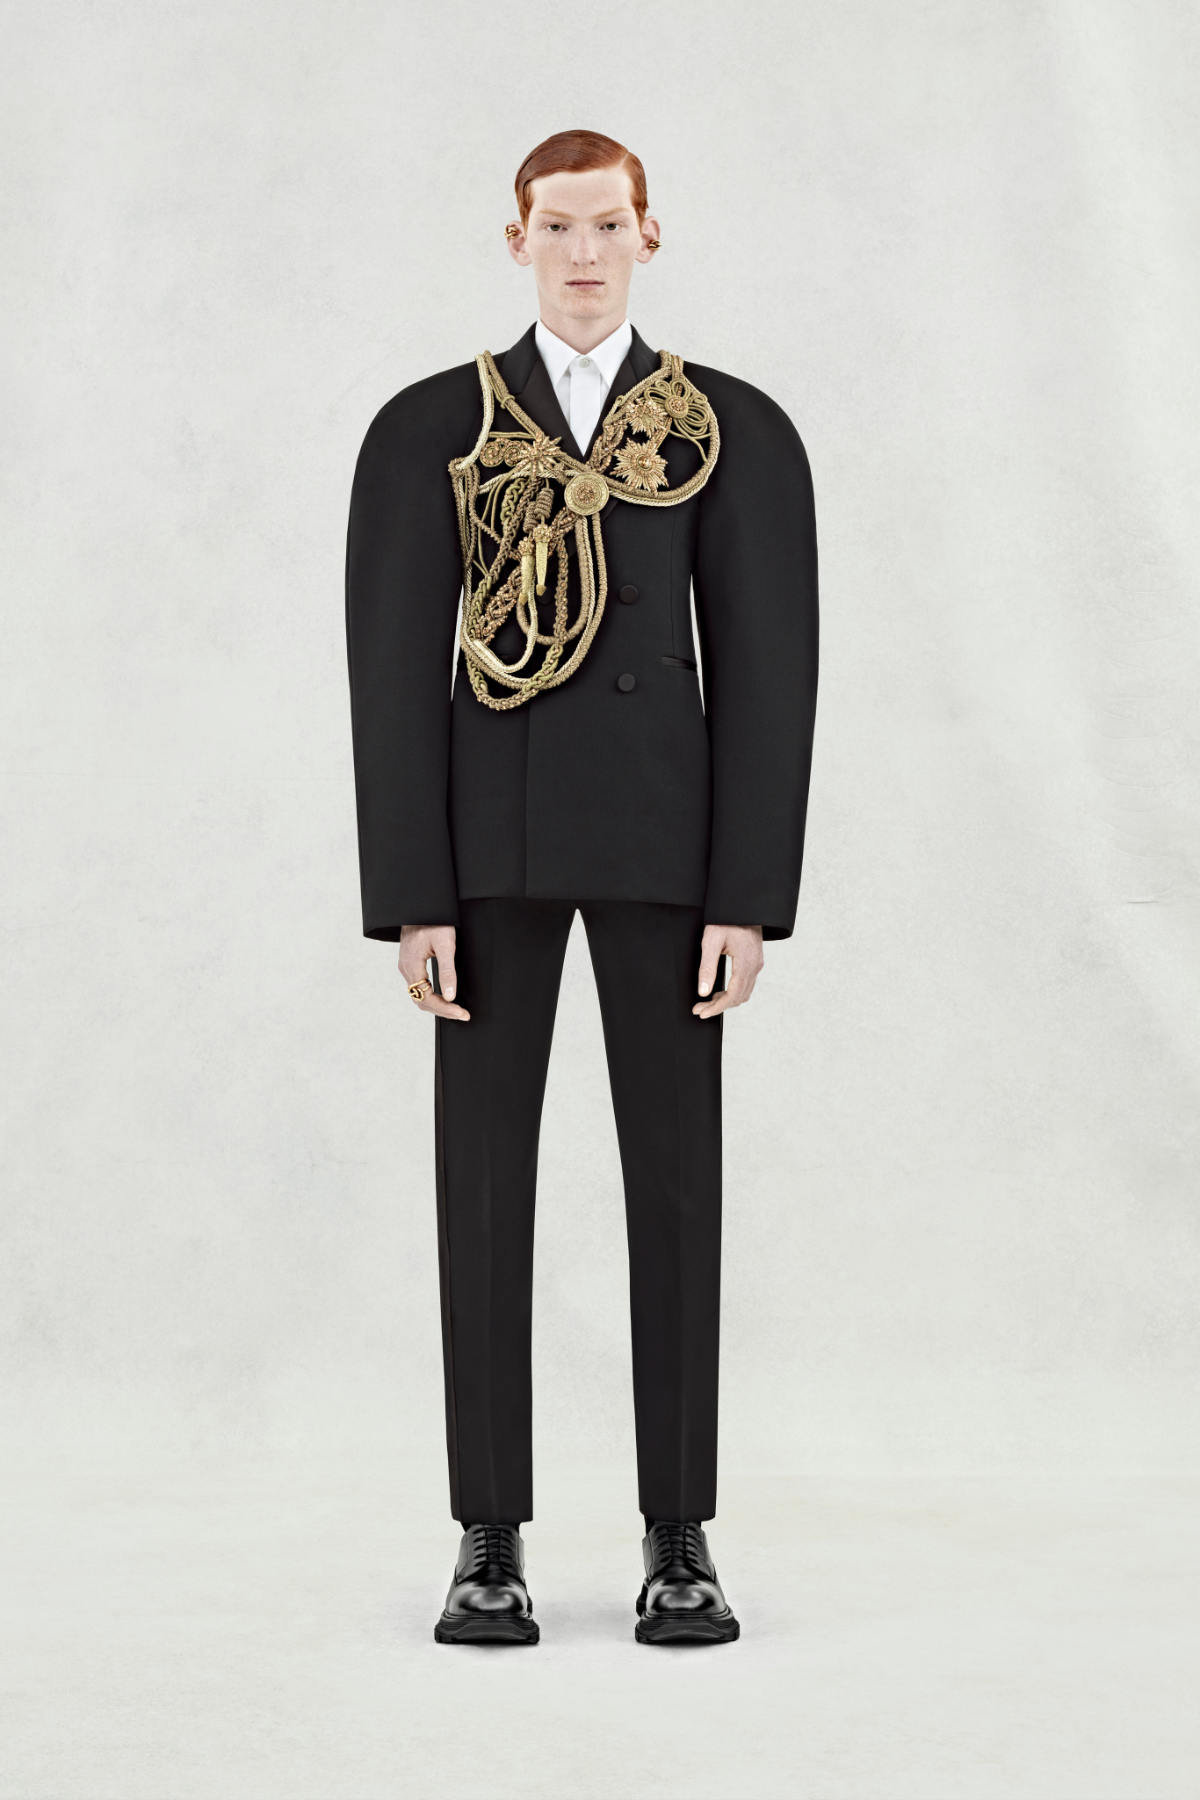 Alexander McQueen Presents Its New Spring Summer 2024 Menswear Collection